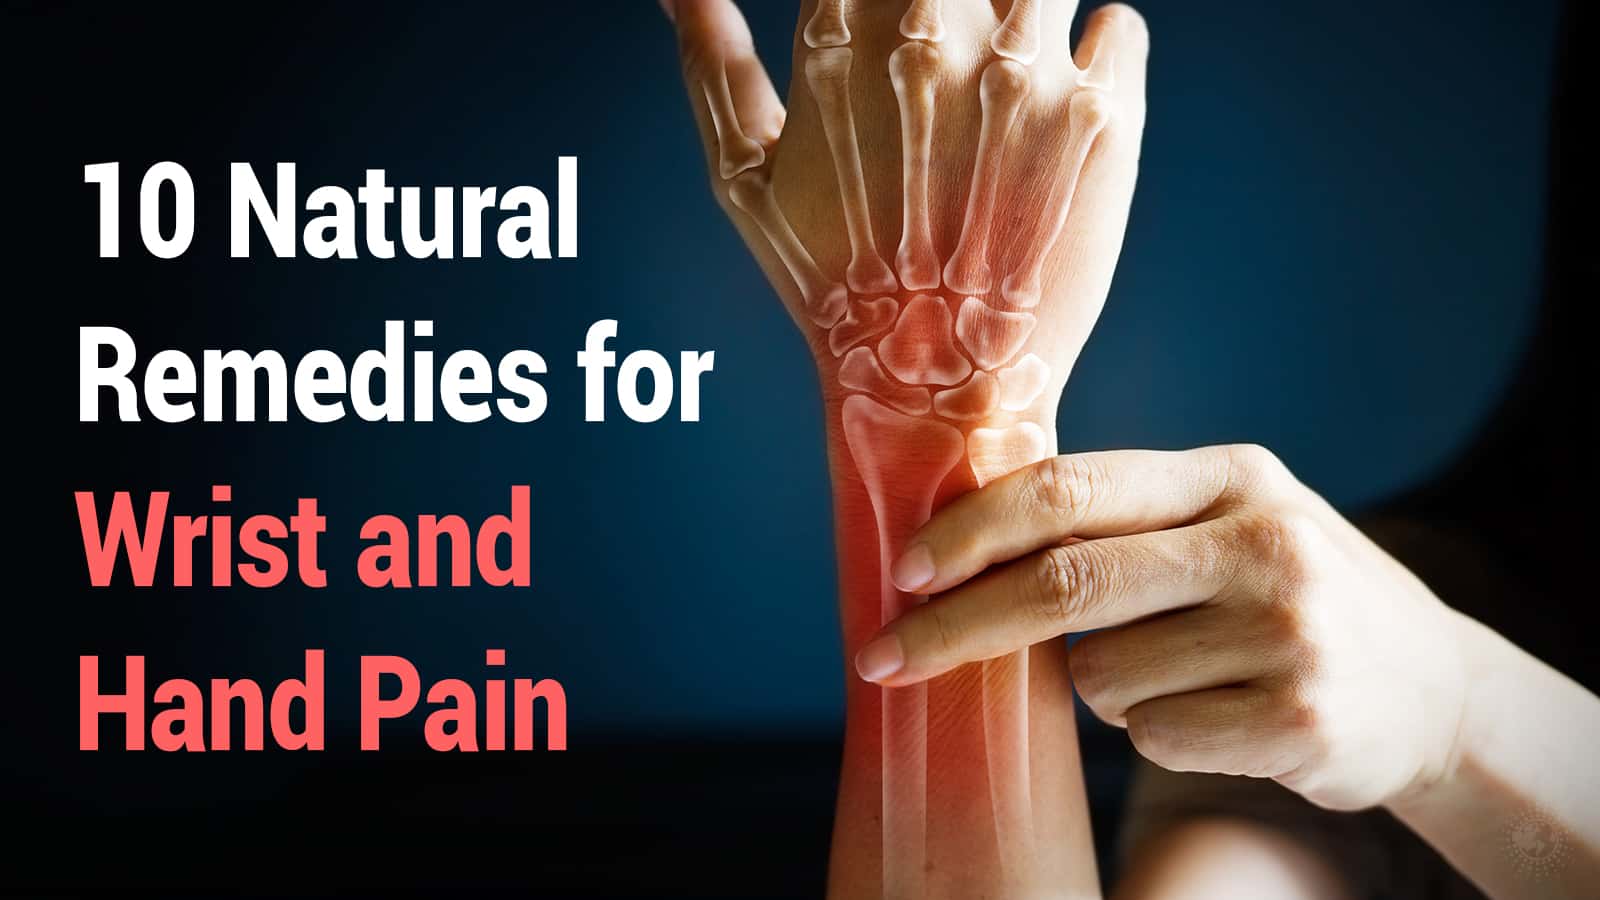 10 Natural Remedies for Wrist and Hand Pain